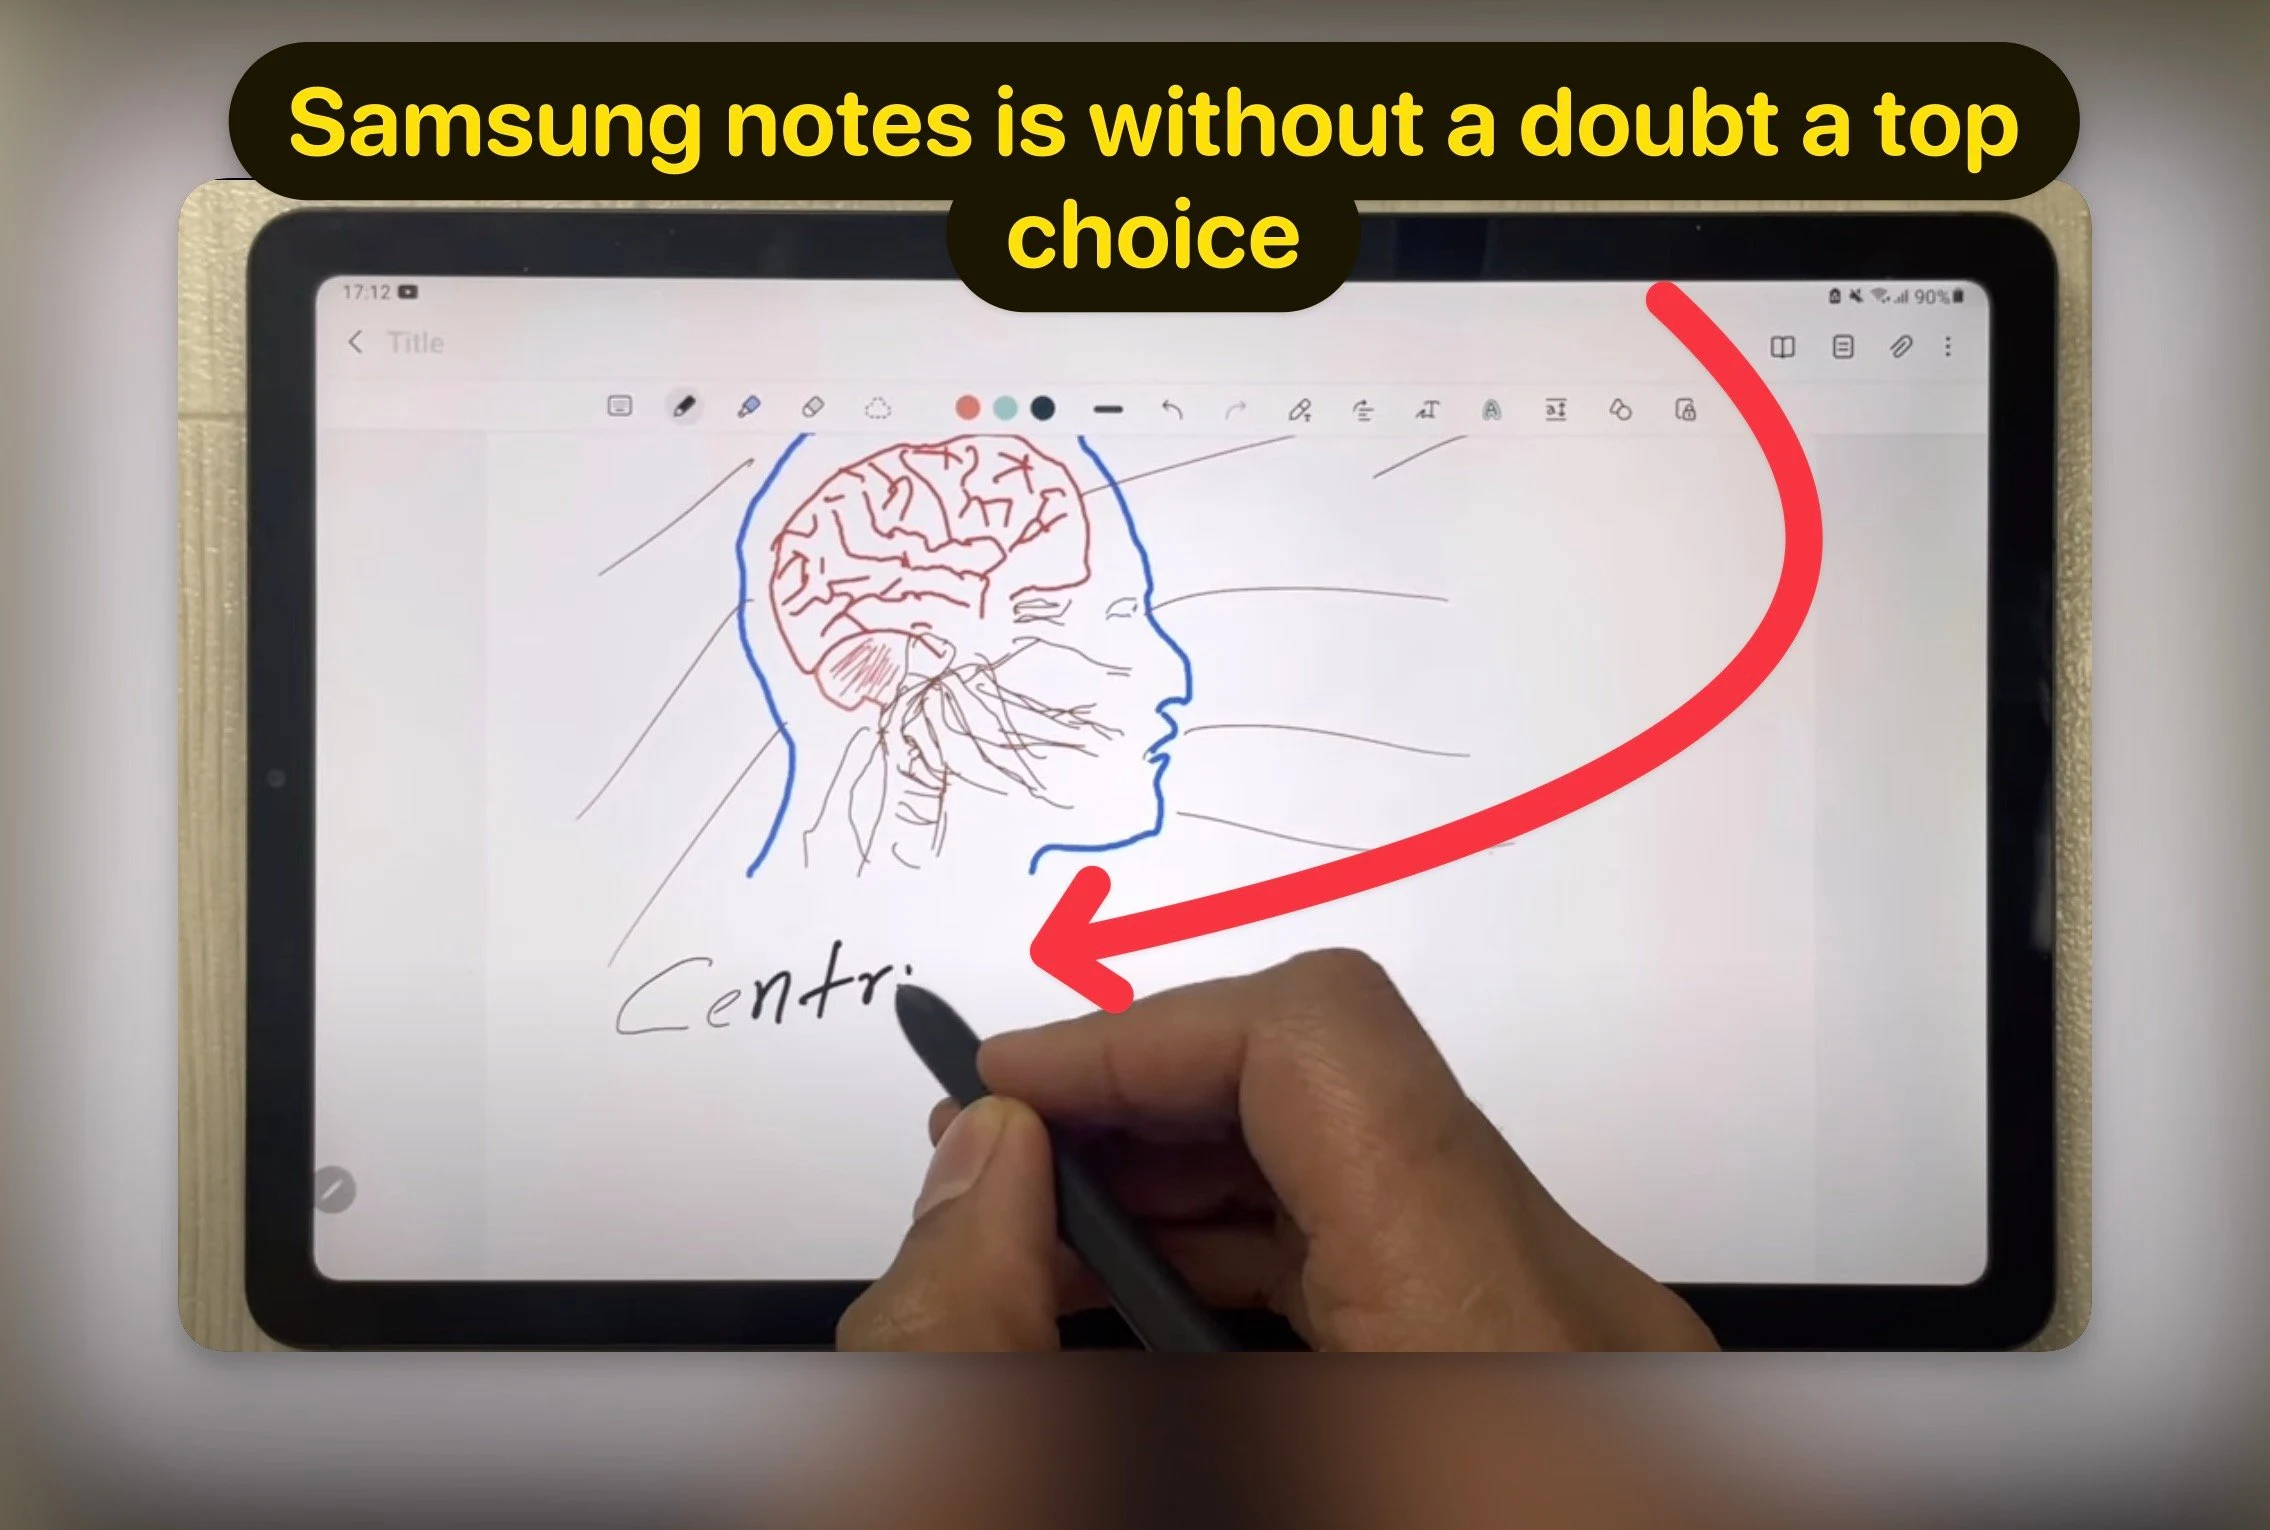 Example of a note being created on Samsung Notes